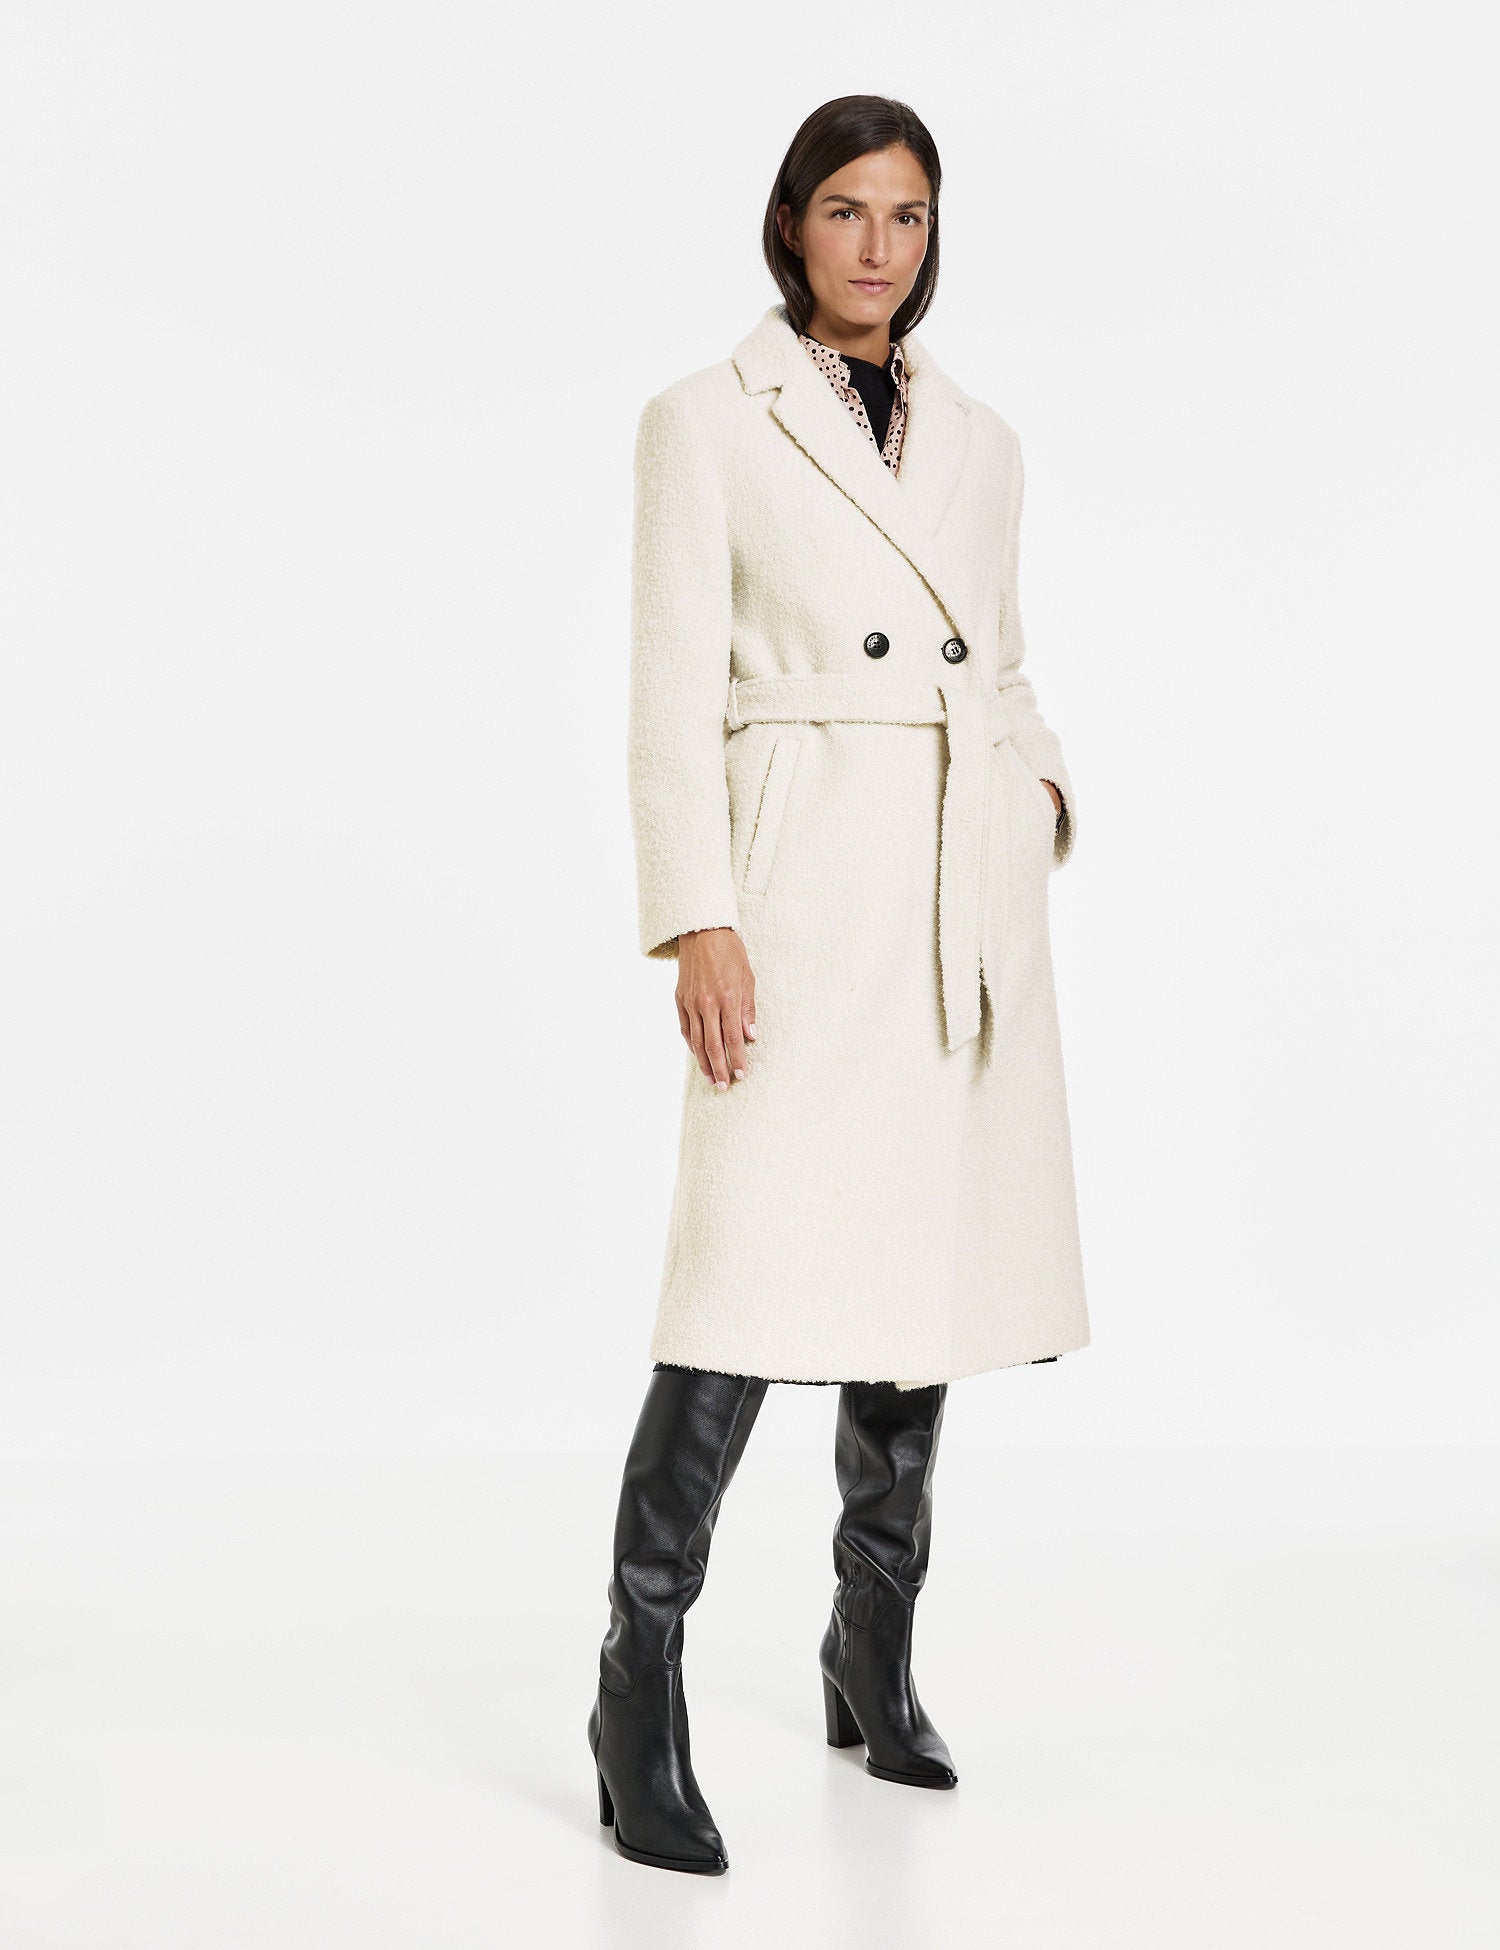 Wool Coat With A Bouclé Finish_250003-31130_99700_07